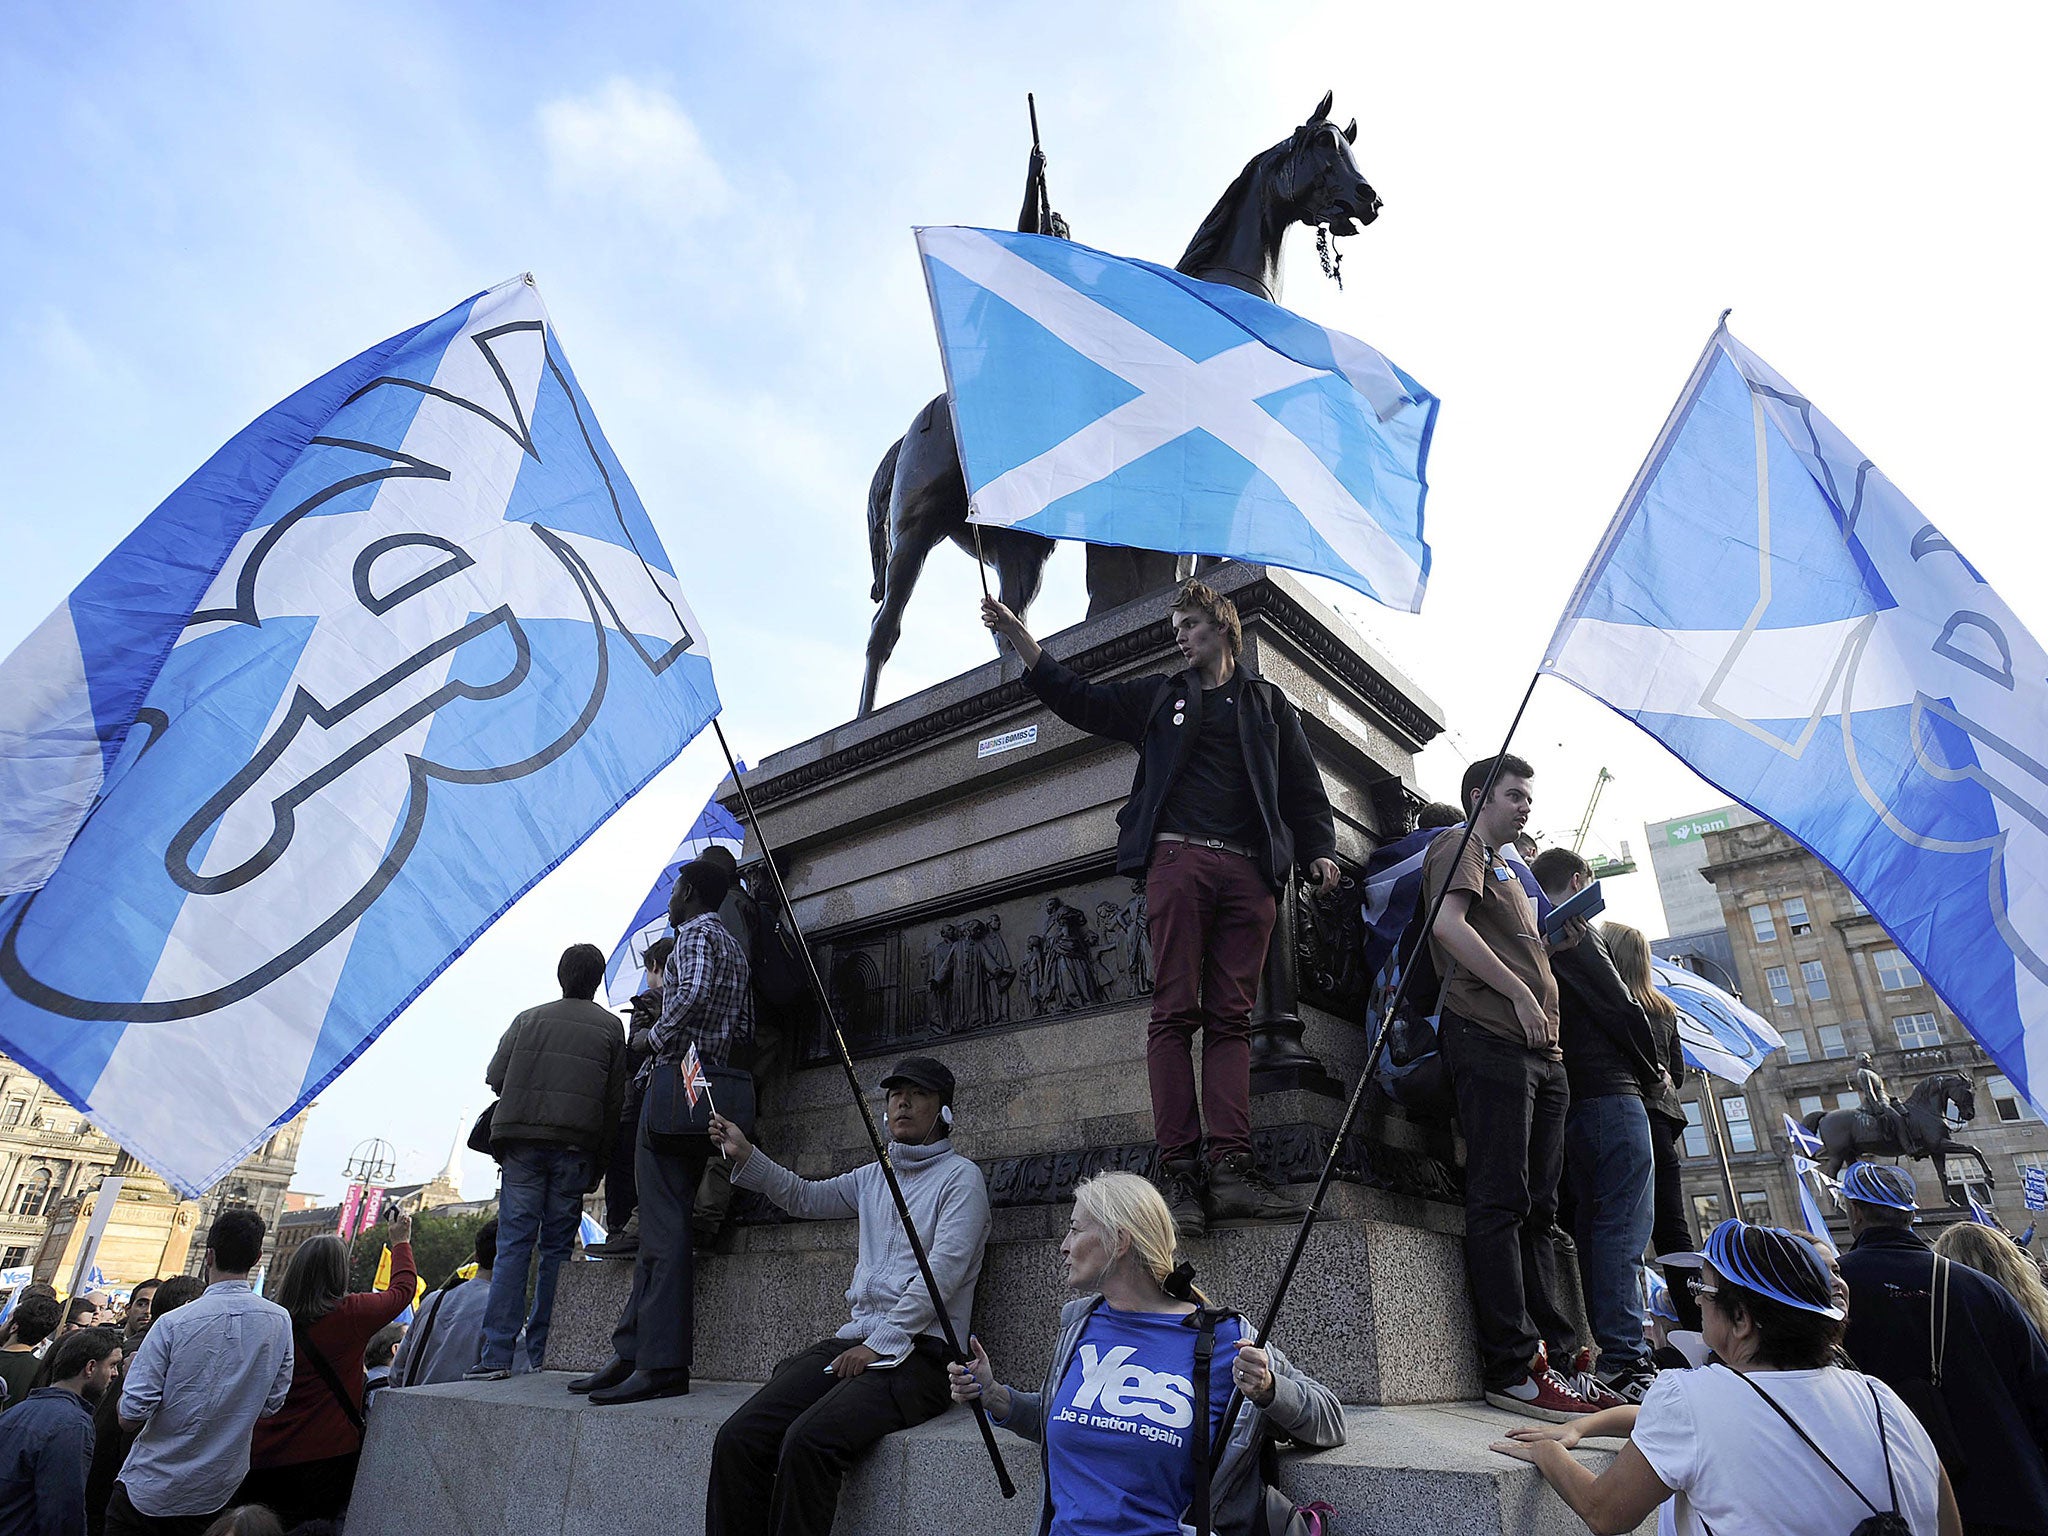 Pro-independence supporters wave Scottish flags in Glasgow's George Square, in Scotland, on September 17, 2014.